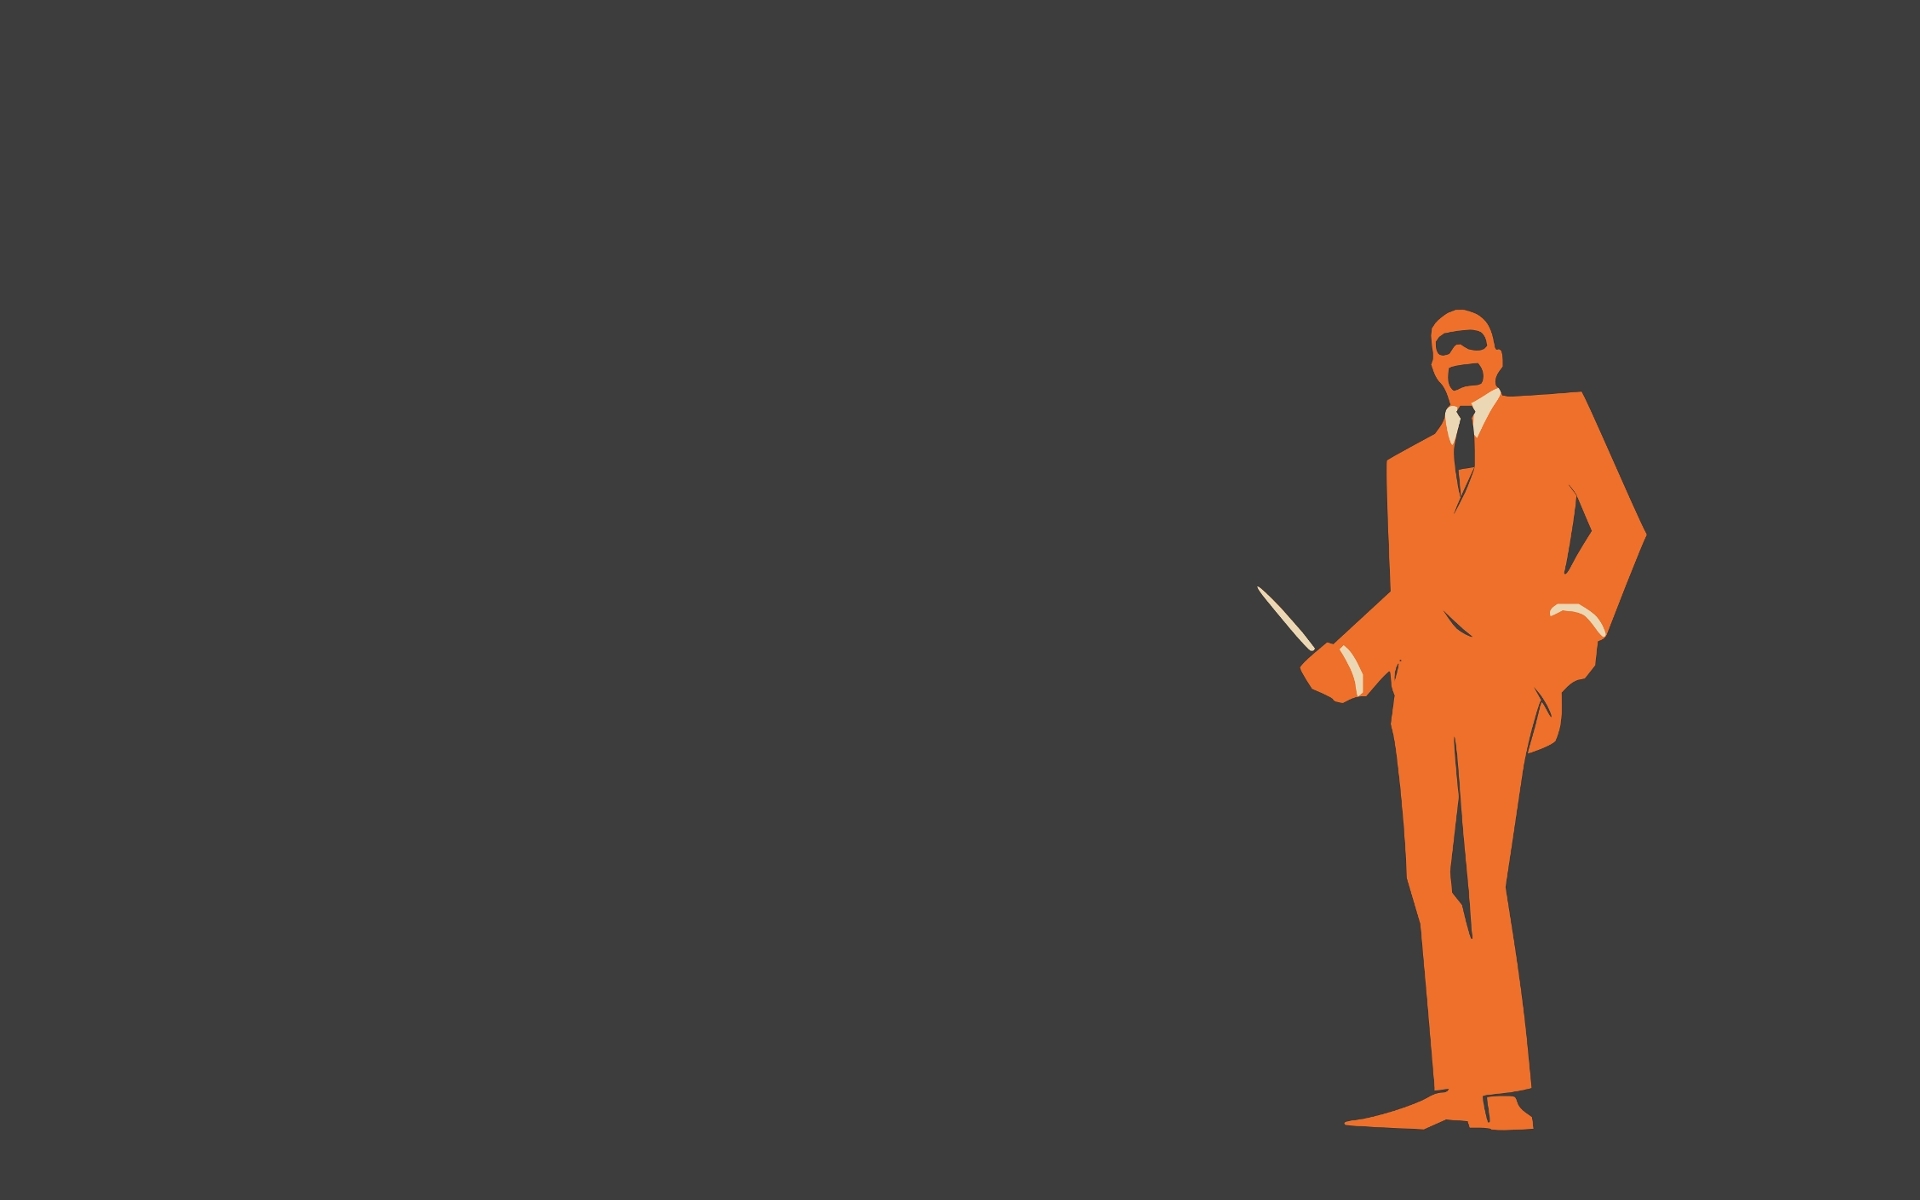 Gallery For Gt Team Fortress Spy Wallpaper